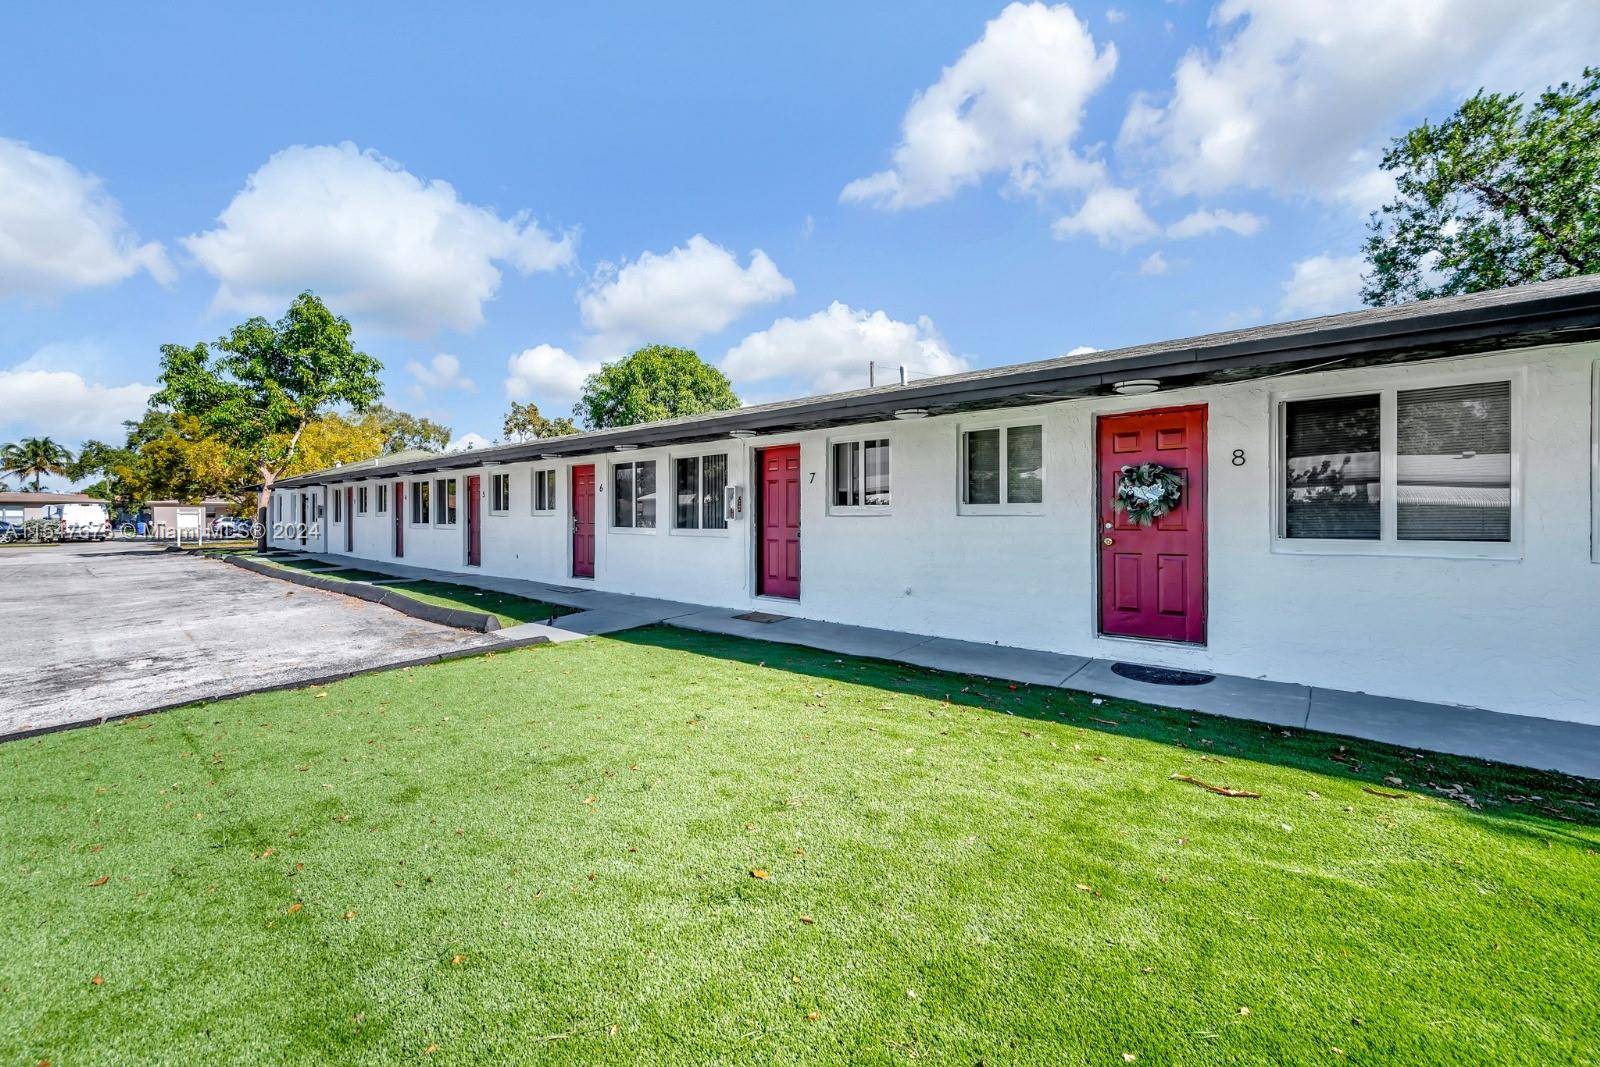 We are pleased to present 2308 Jackson St, a turnkey 9 unit multifamily gem just 2 minutes away from Young Circle and downtown Hollywood.